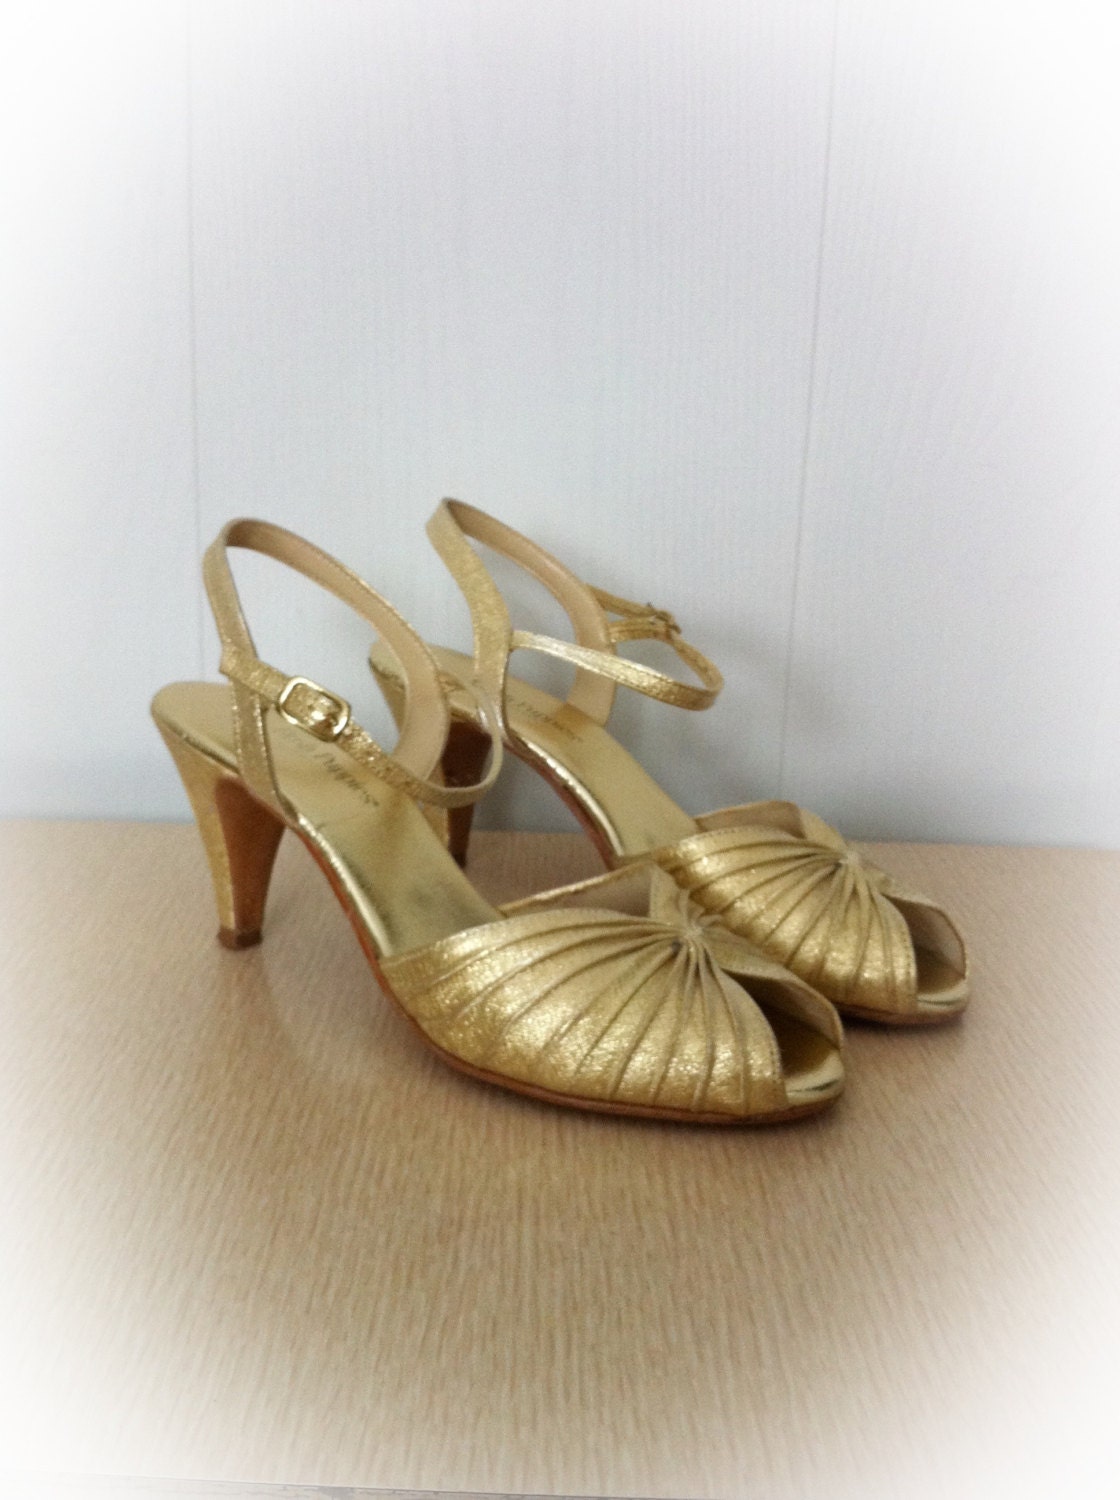 Vintage 1970s Shoes Gold Hush Puppies Peep Toe High Heels Size 6 M